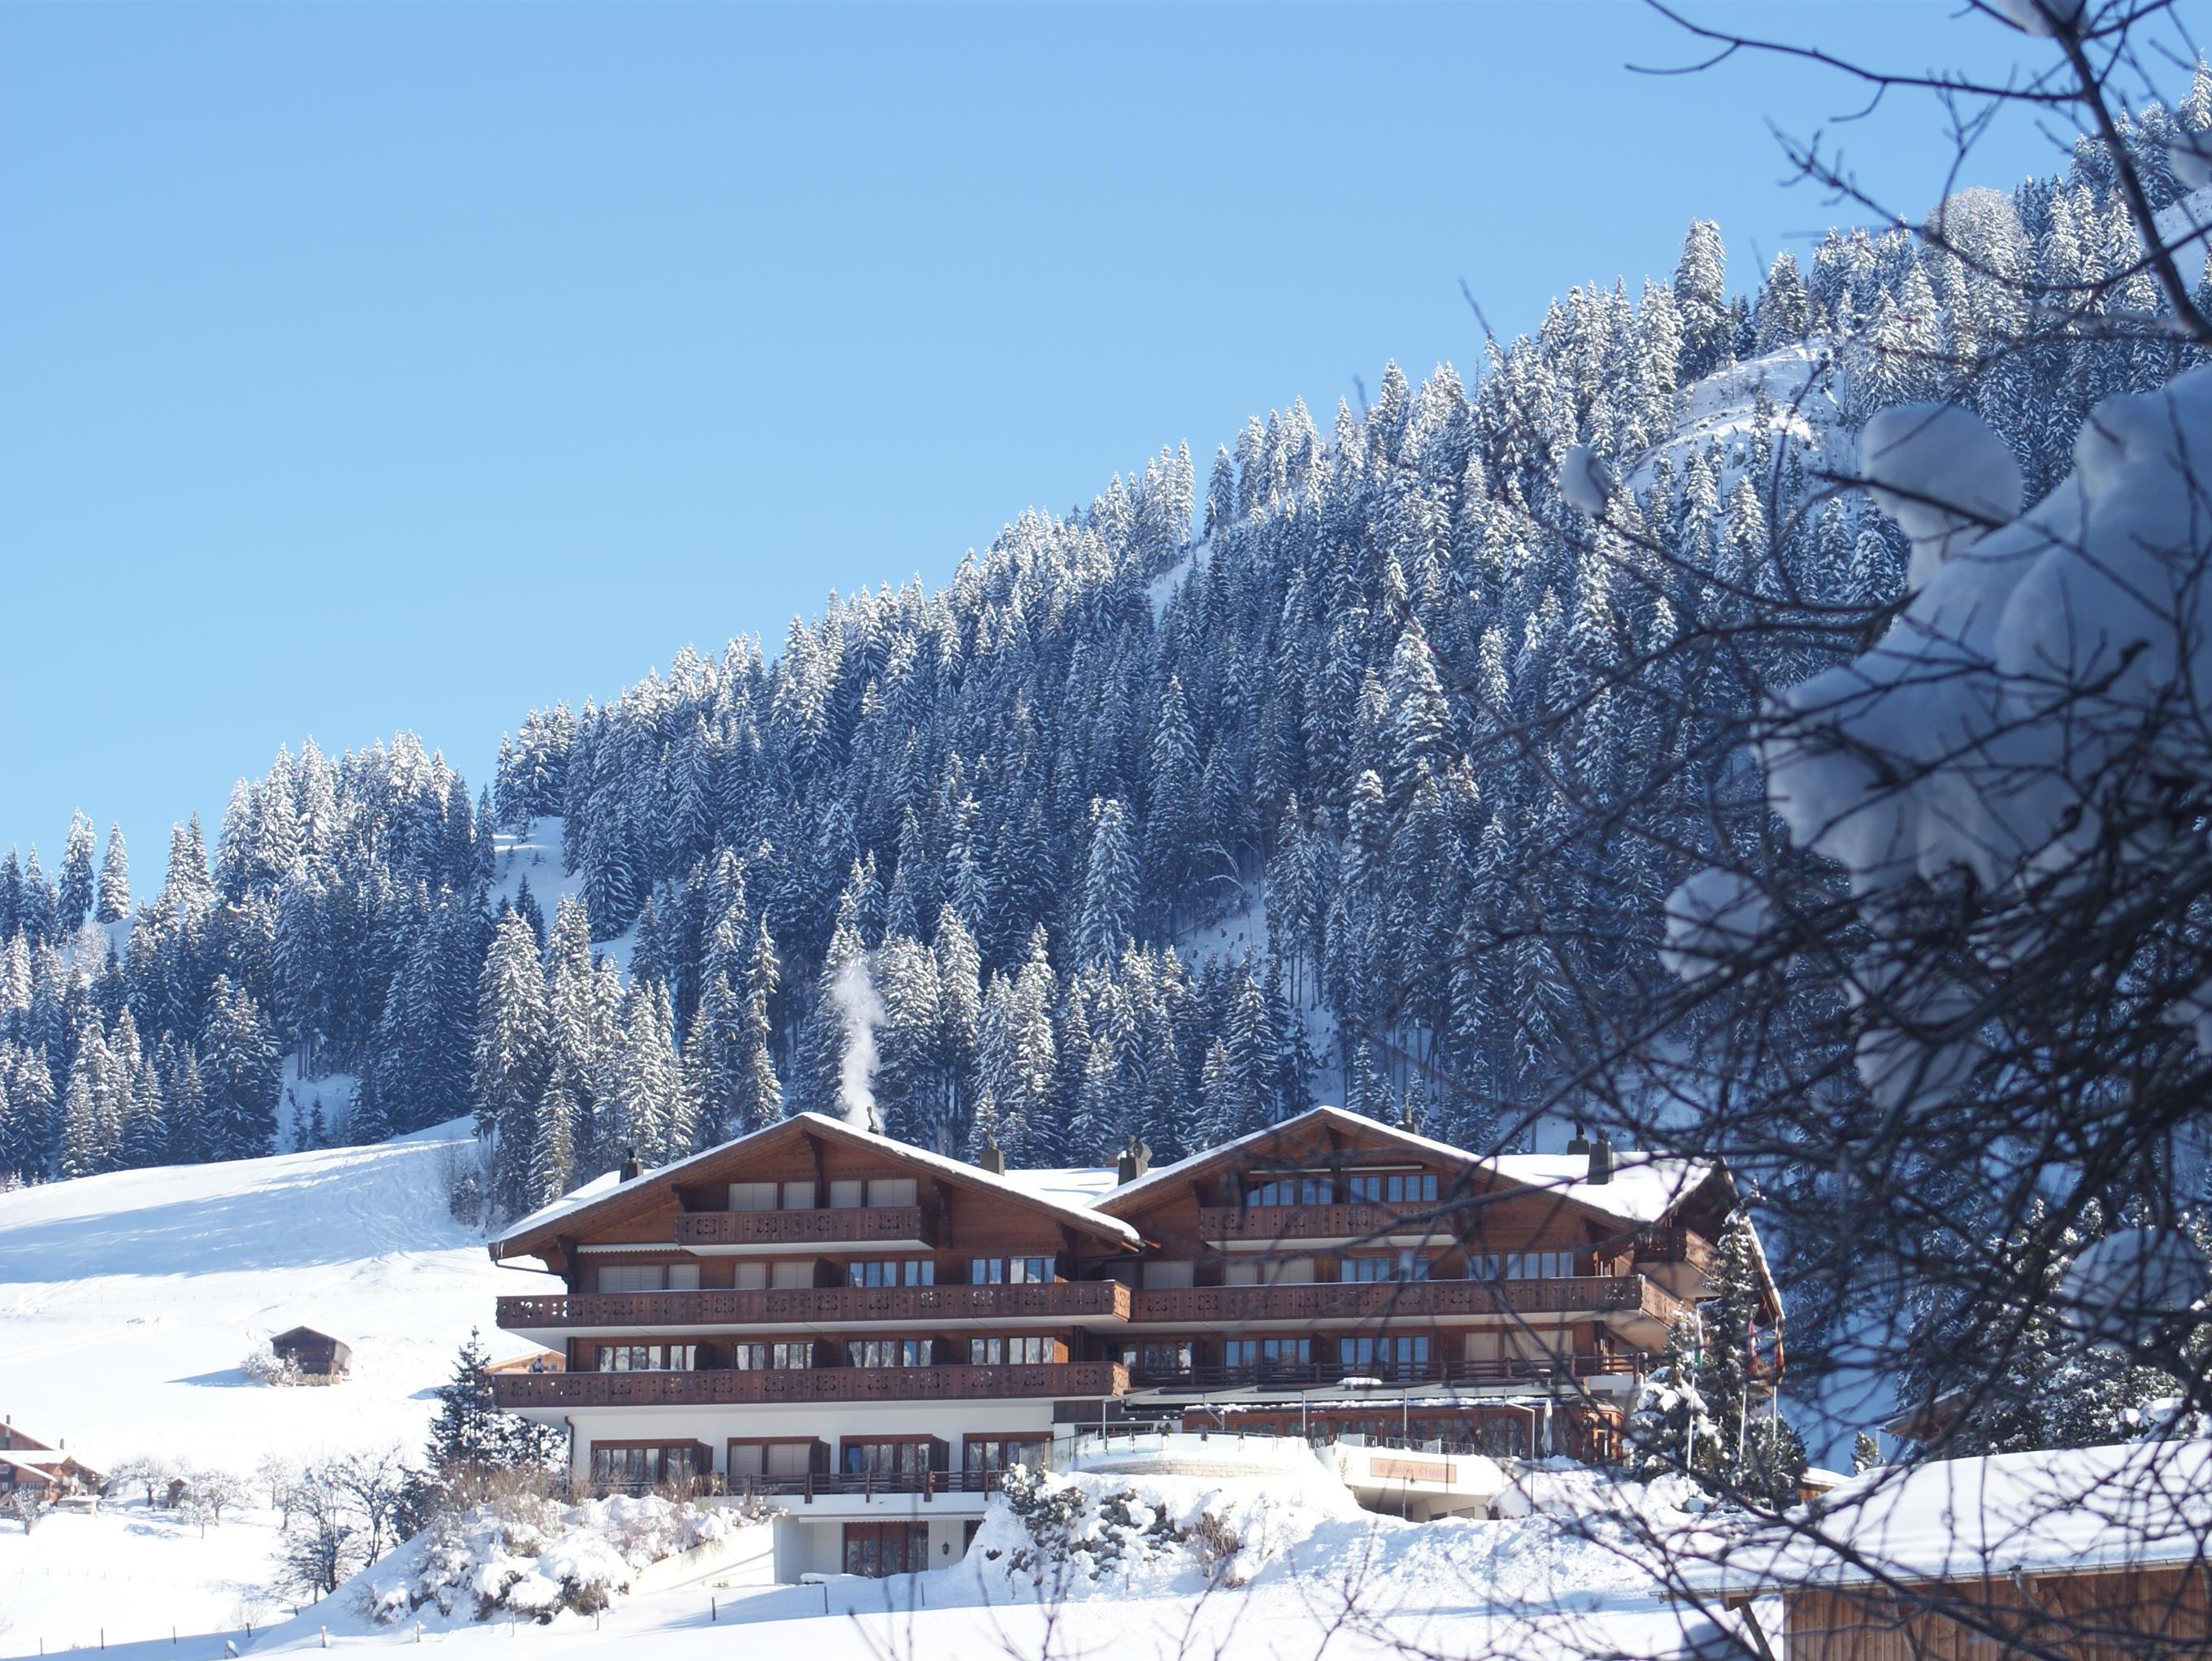 Le Grand Chalet Switzerland FAQ 2017, What facilities are there in Le Grand Chalet Switzerland 2017, What Languages Spoken are Supported in Le Grand Chalet Switzerland 2017, Which payment cards are accepted in Le Grand Chalet Switzerland , Switzerland Le Grand Chalet room facilities and services Q&A 2017, Switzerland Le Grand Chalet online booking services 2017, Switzerland Le Grand Chalet address 2017, Switzerland Le Grand Chalet telephone number 2017,Switzerland Le Grand Chalet map 2017, Switzerland Le Grand Chalet traffic guide 2017, how to go Switzerland Le Grand Chalet, Switzerland Le Grand Chalet booking online 2017, Switzerland Le Grand Chalet room types 2017.